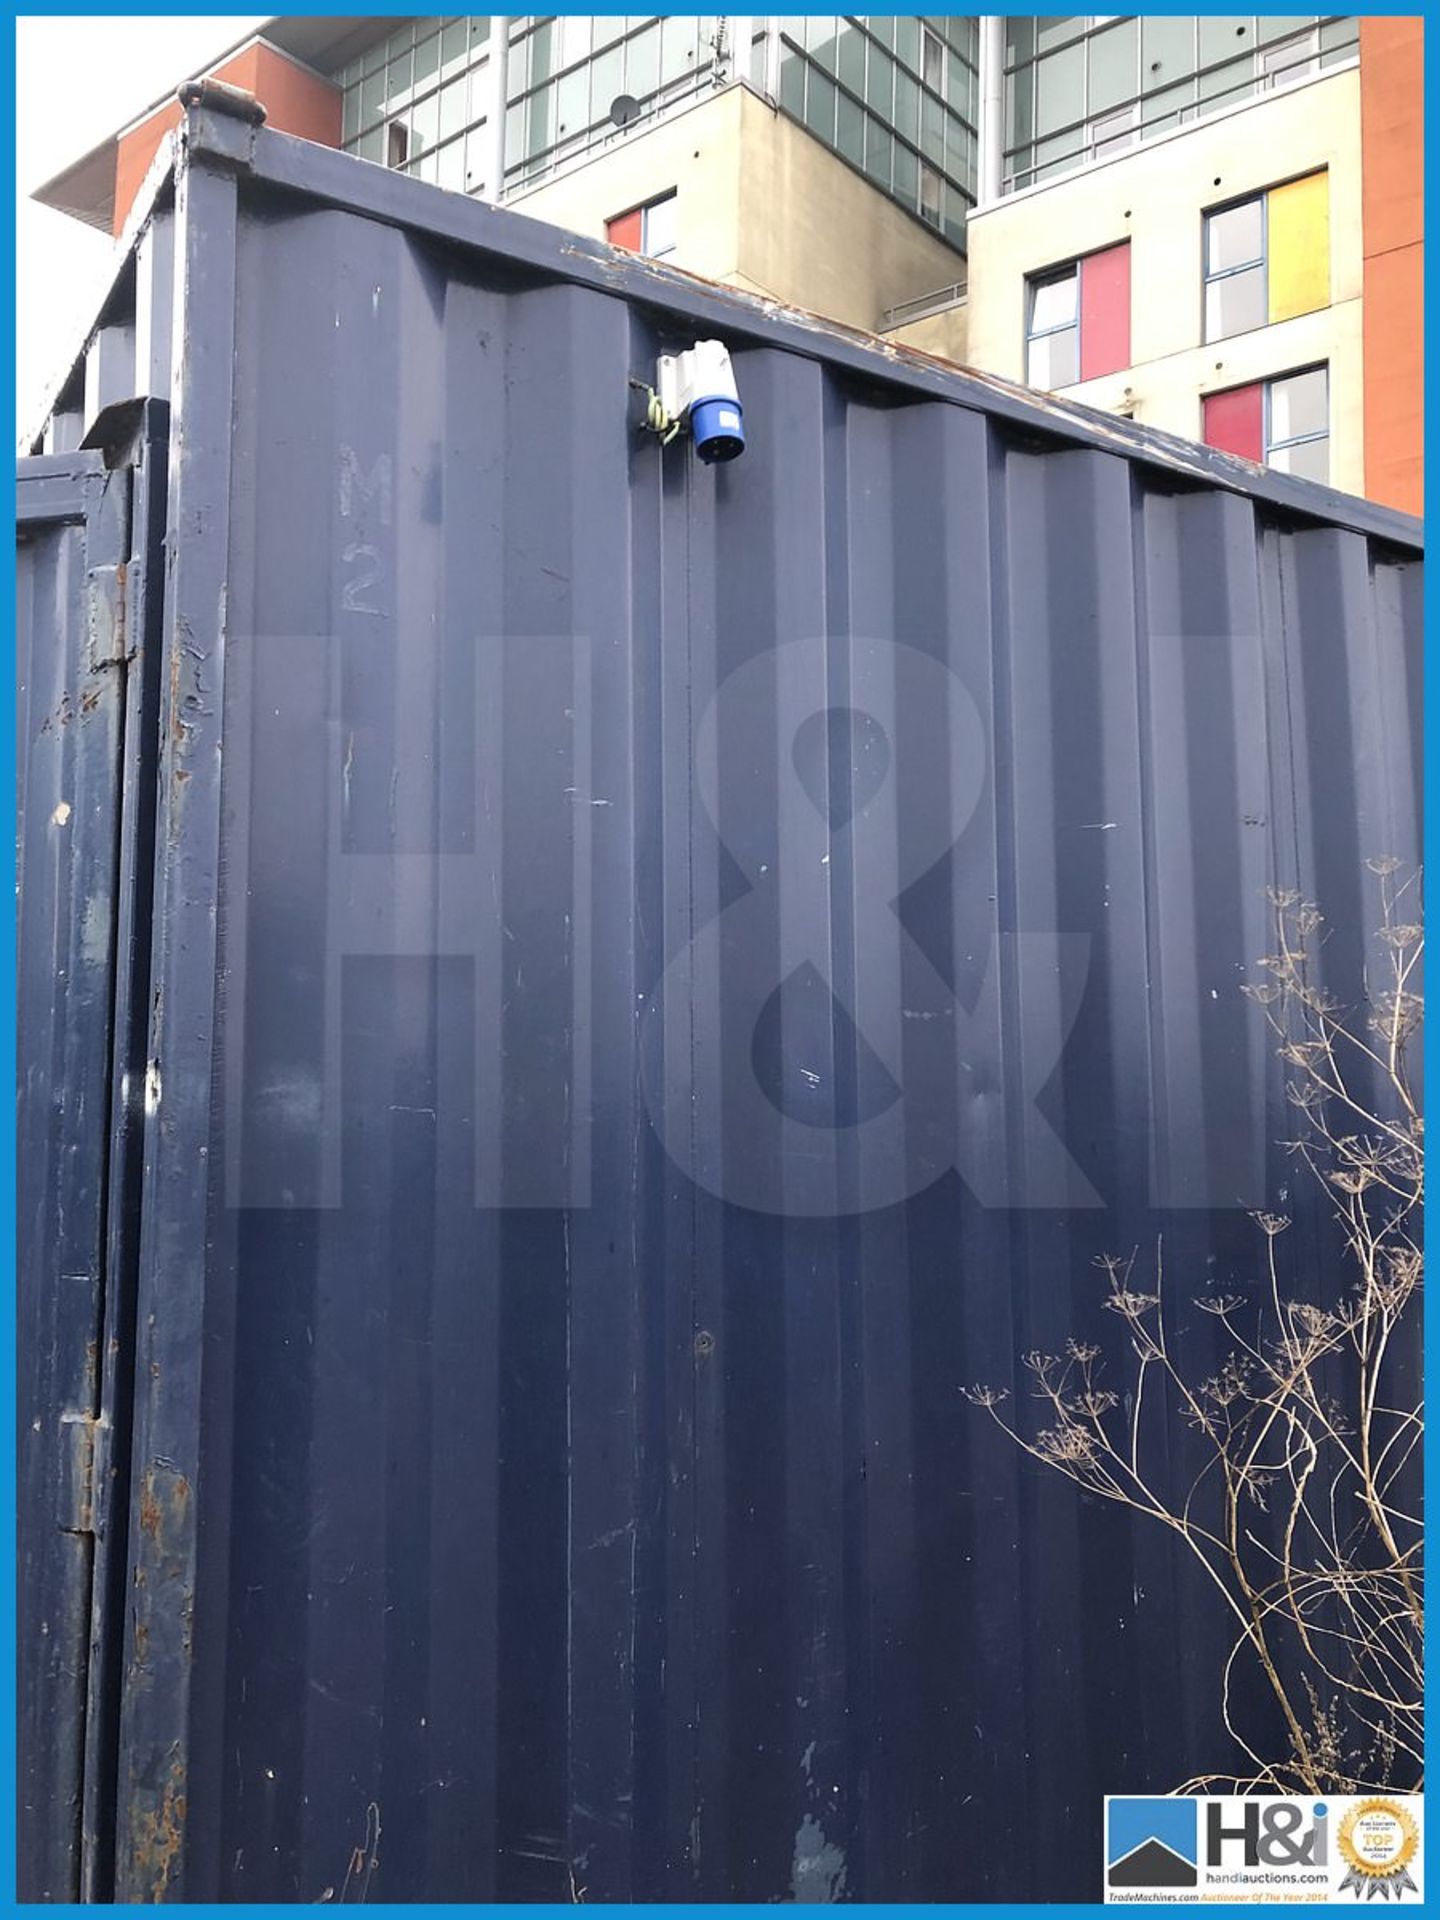 Appx 11ft x 9ft gents site toilet block in excellent condition. Access for a hiab lorry is good. The - Image 9 of 9